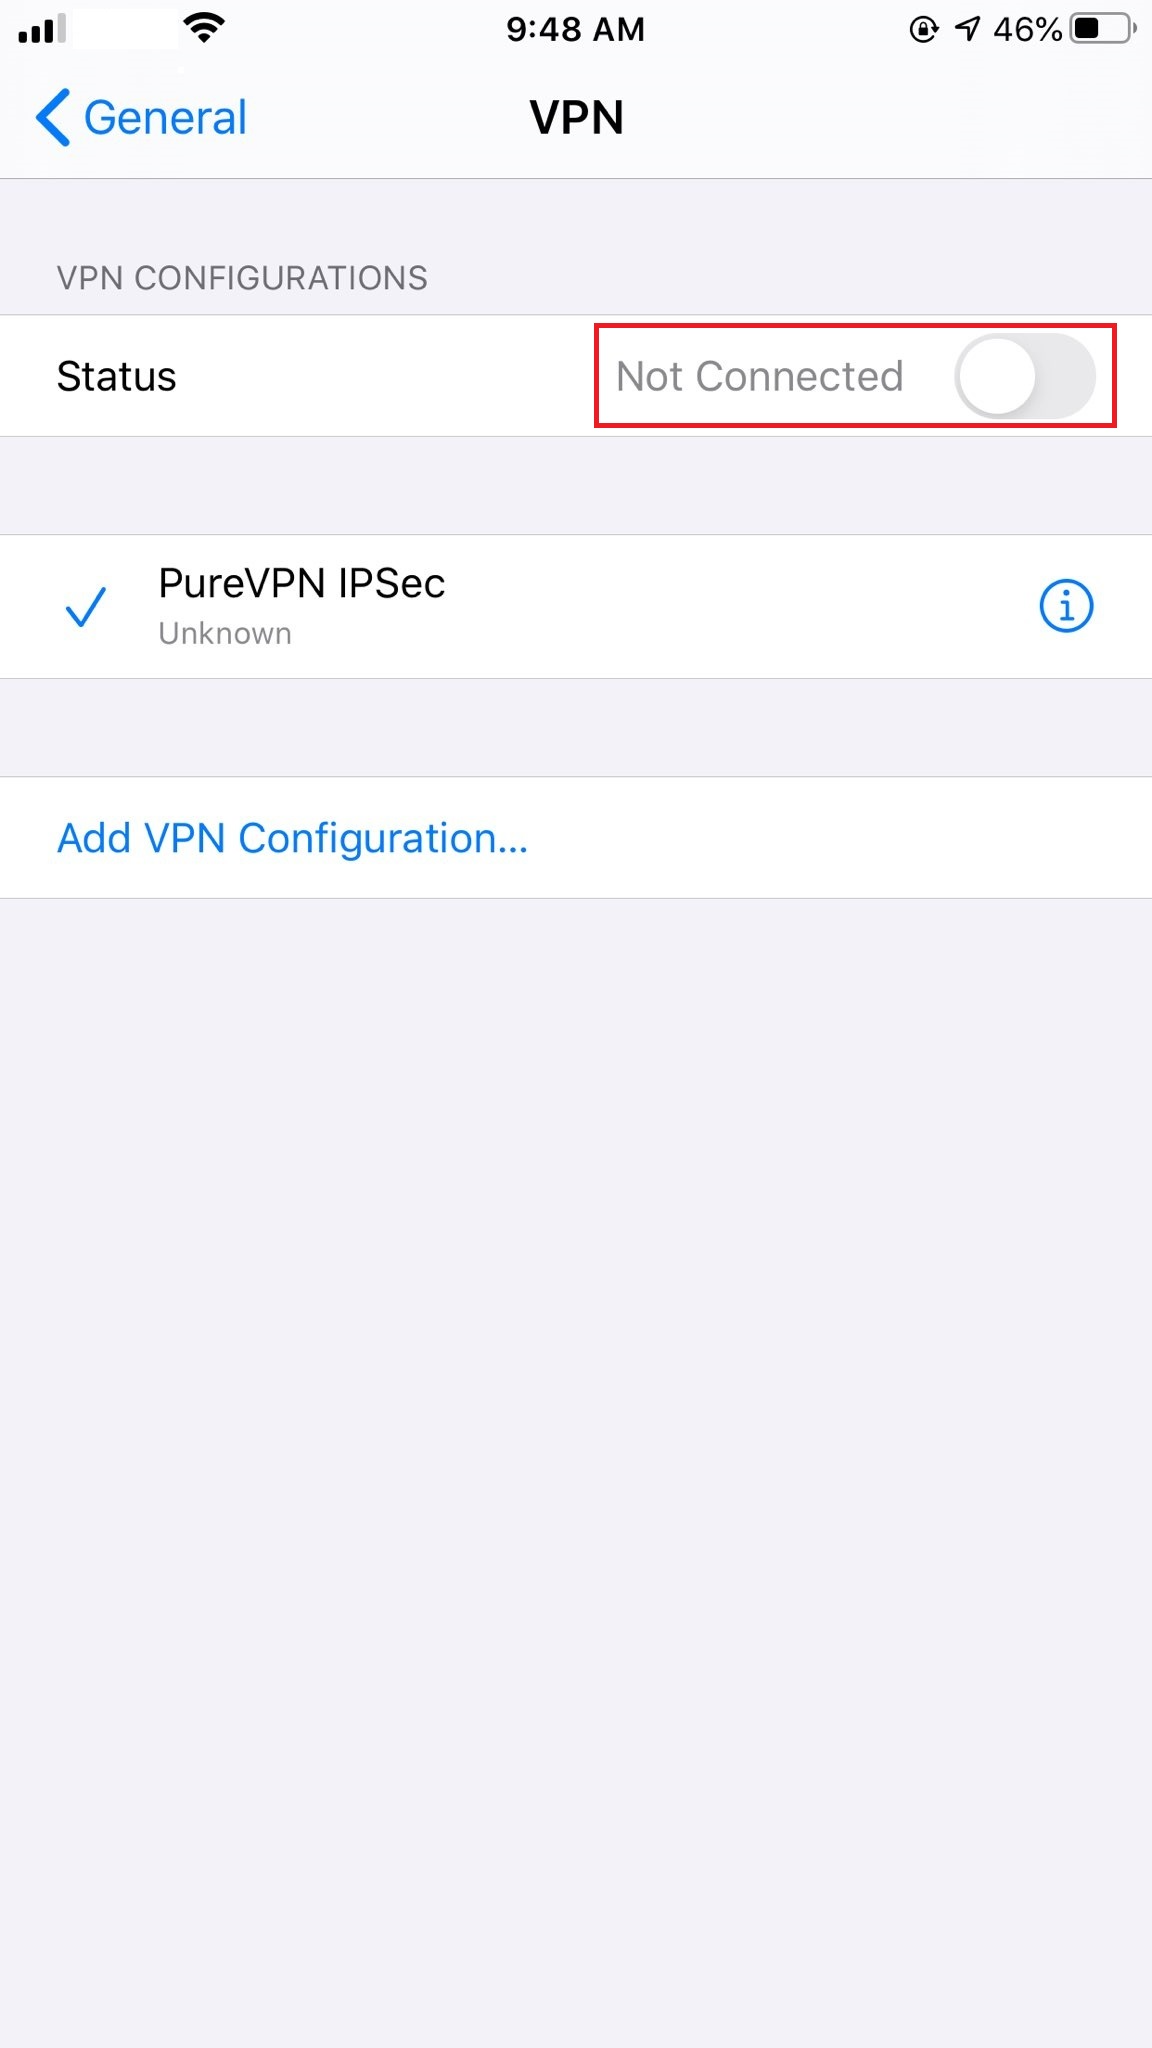 Toggle the Status to turn ON your VPN connection.